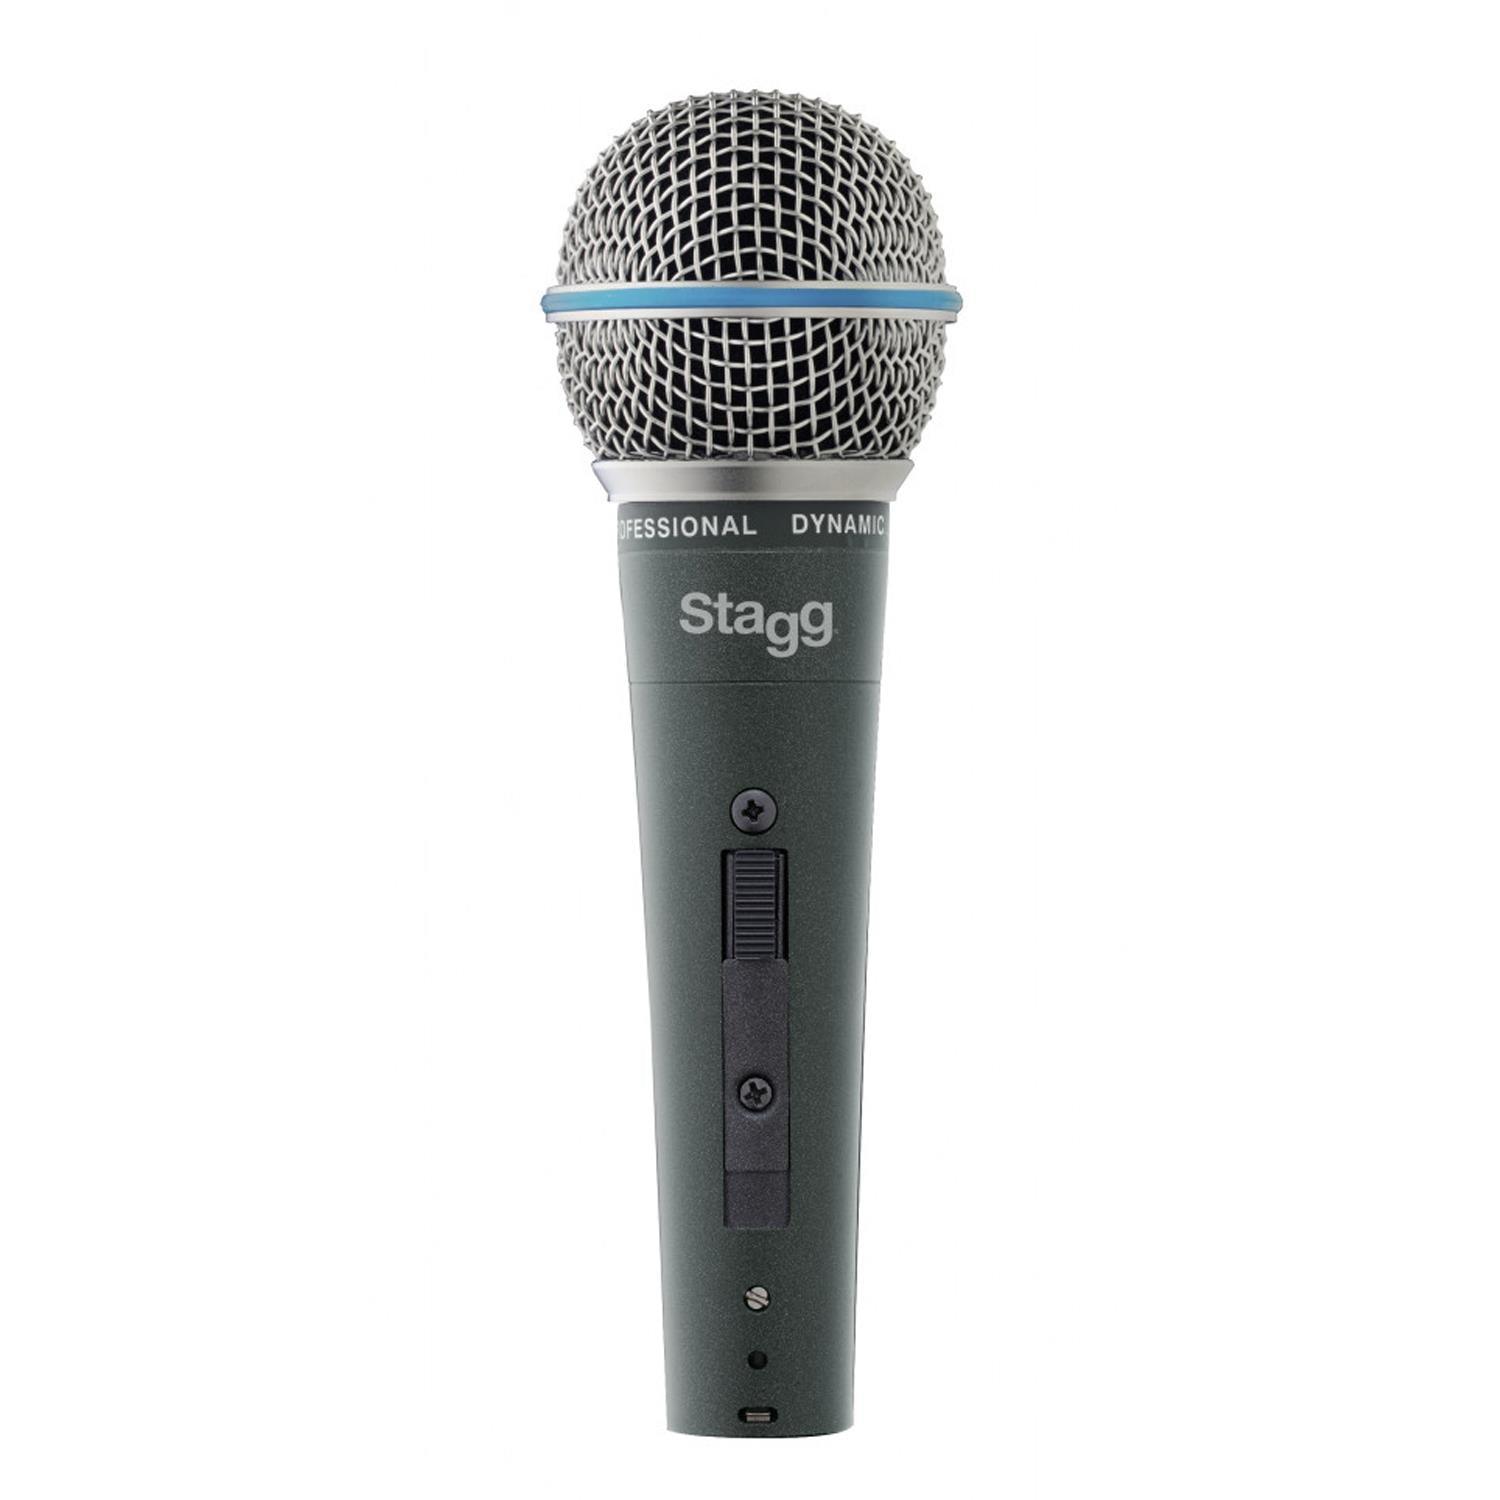 Stagg SDM60 Dynamic Vocal Microphone - DY Pro Audio